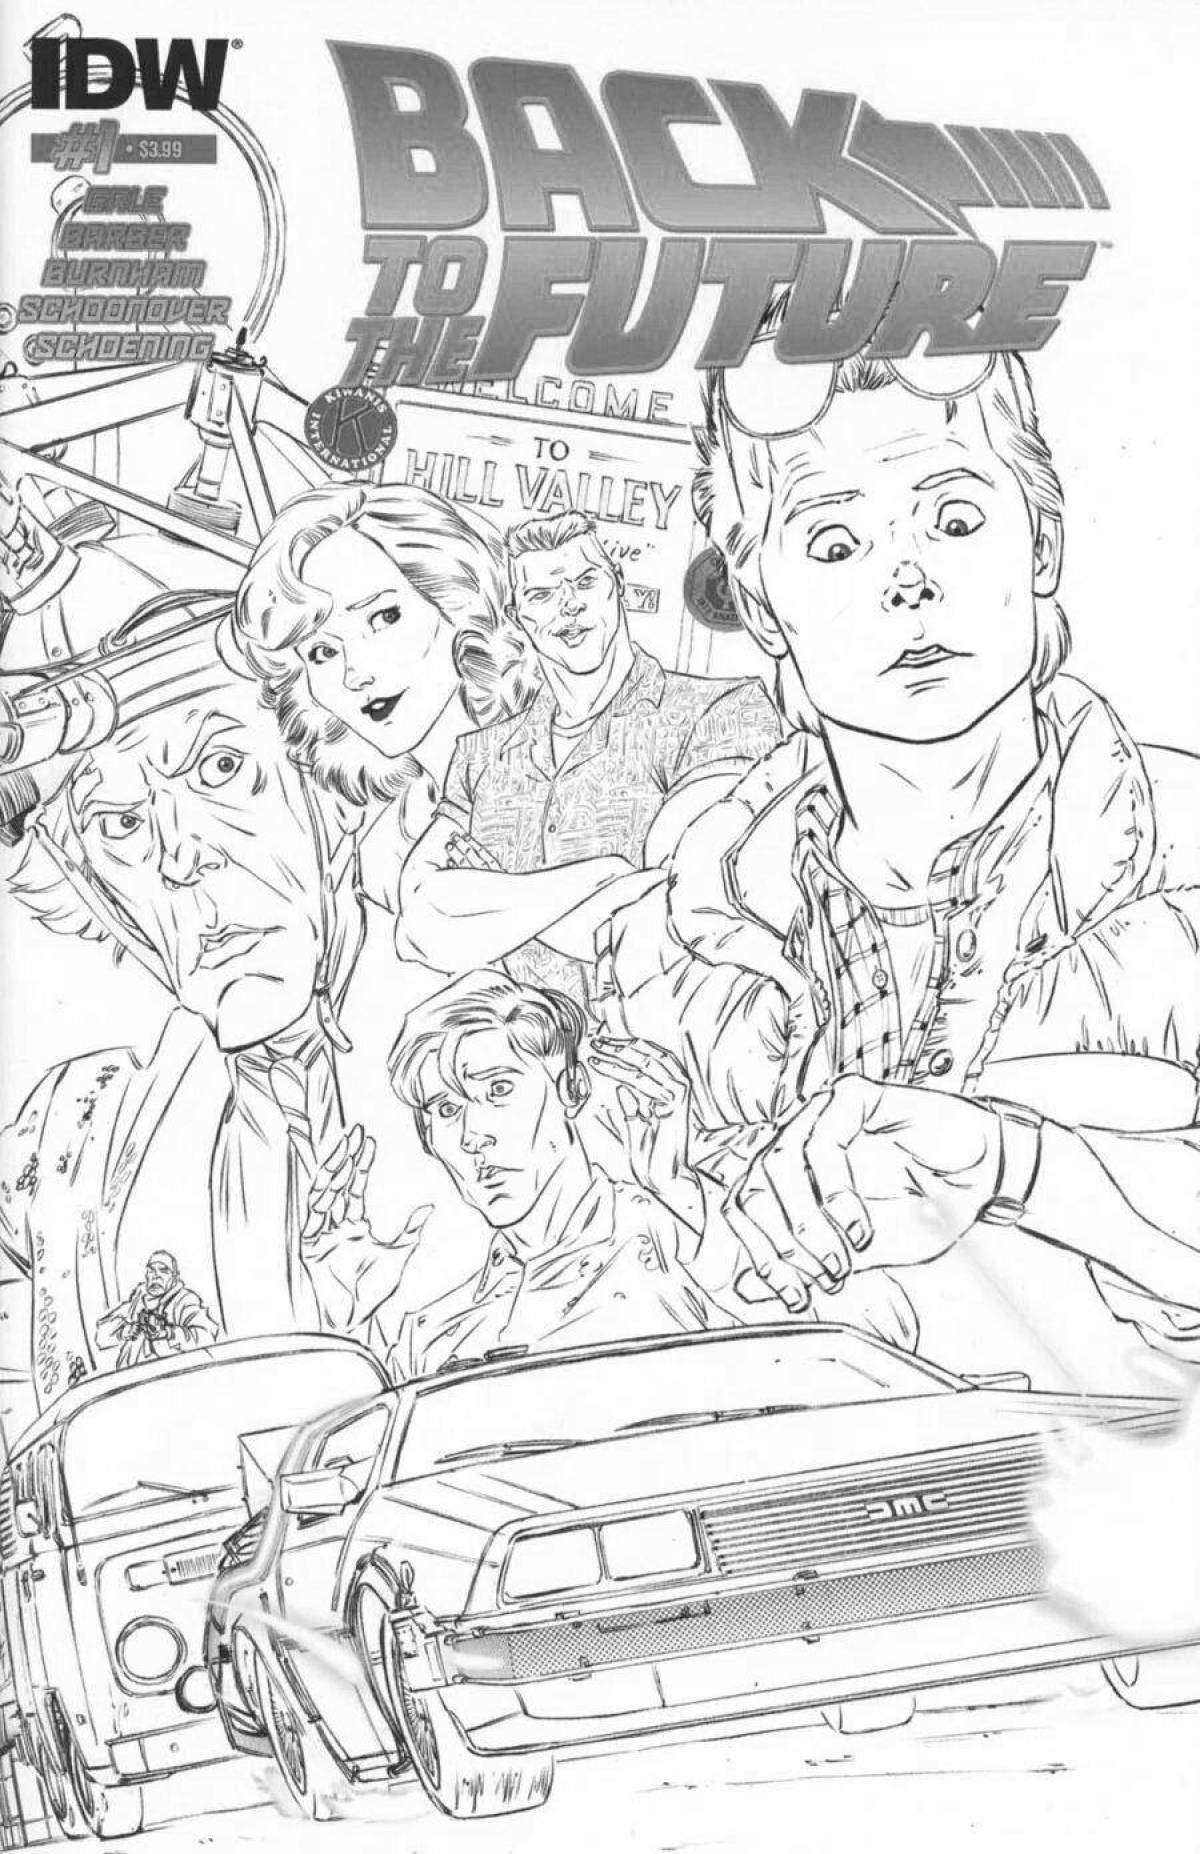 Lively back to the future 2 coloring book